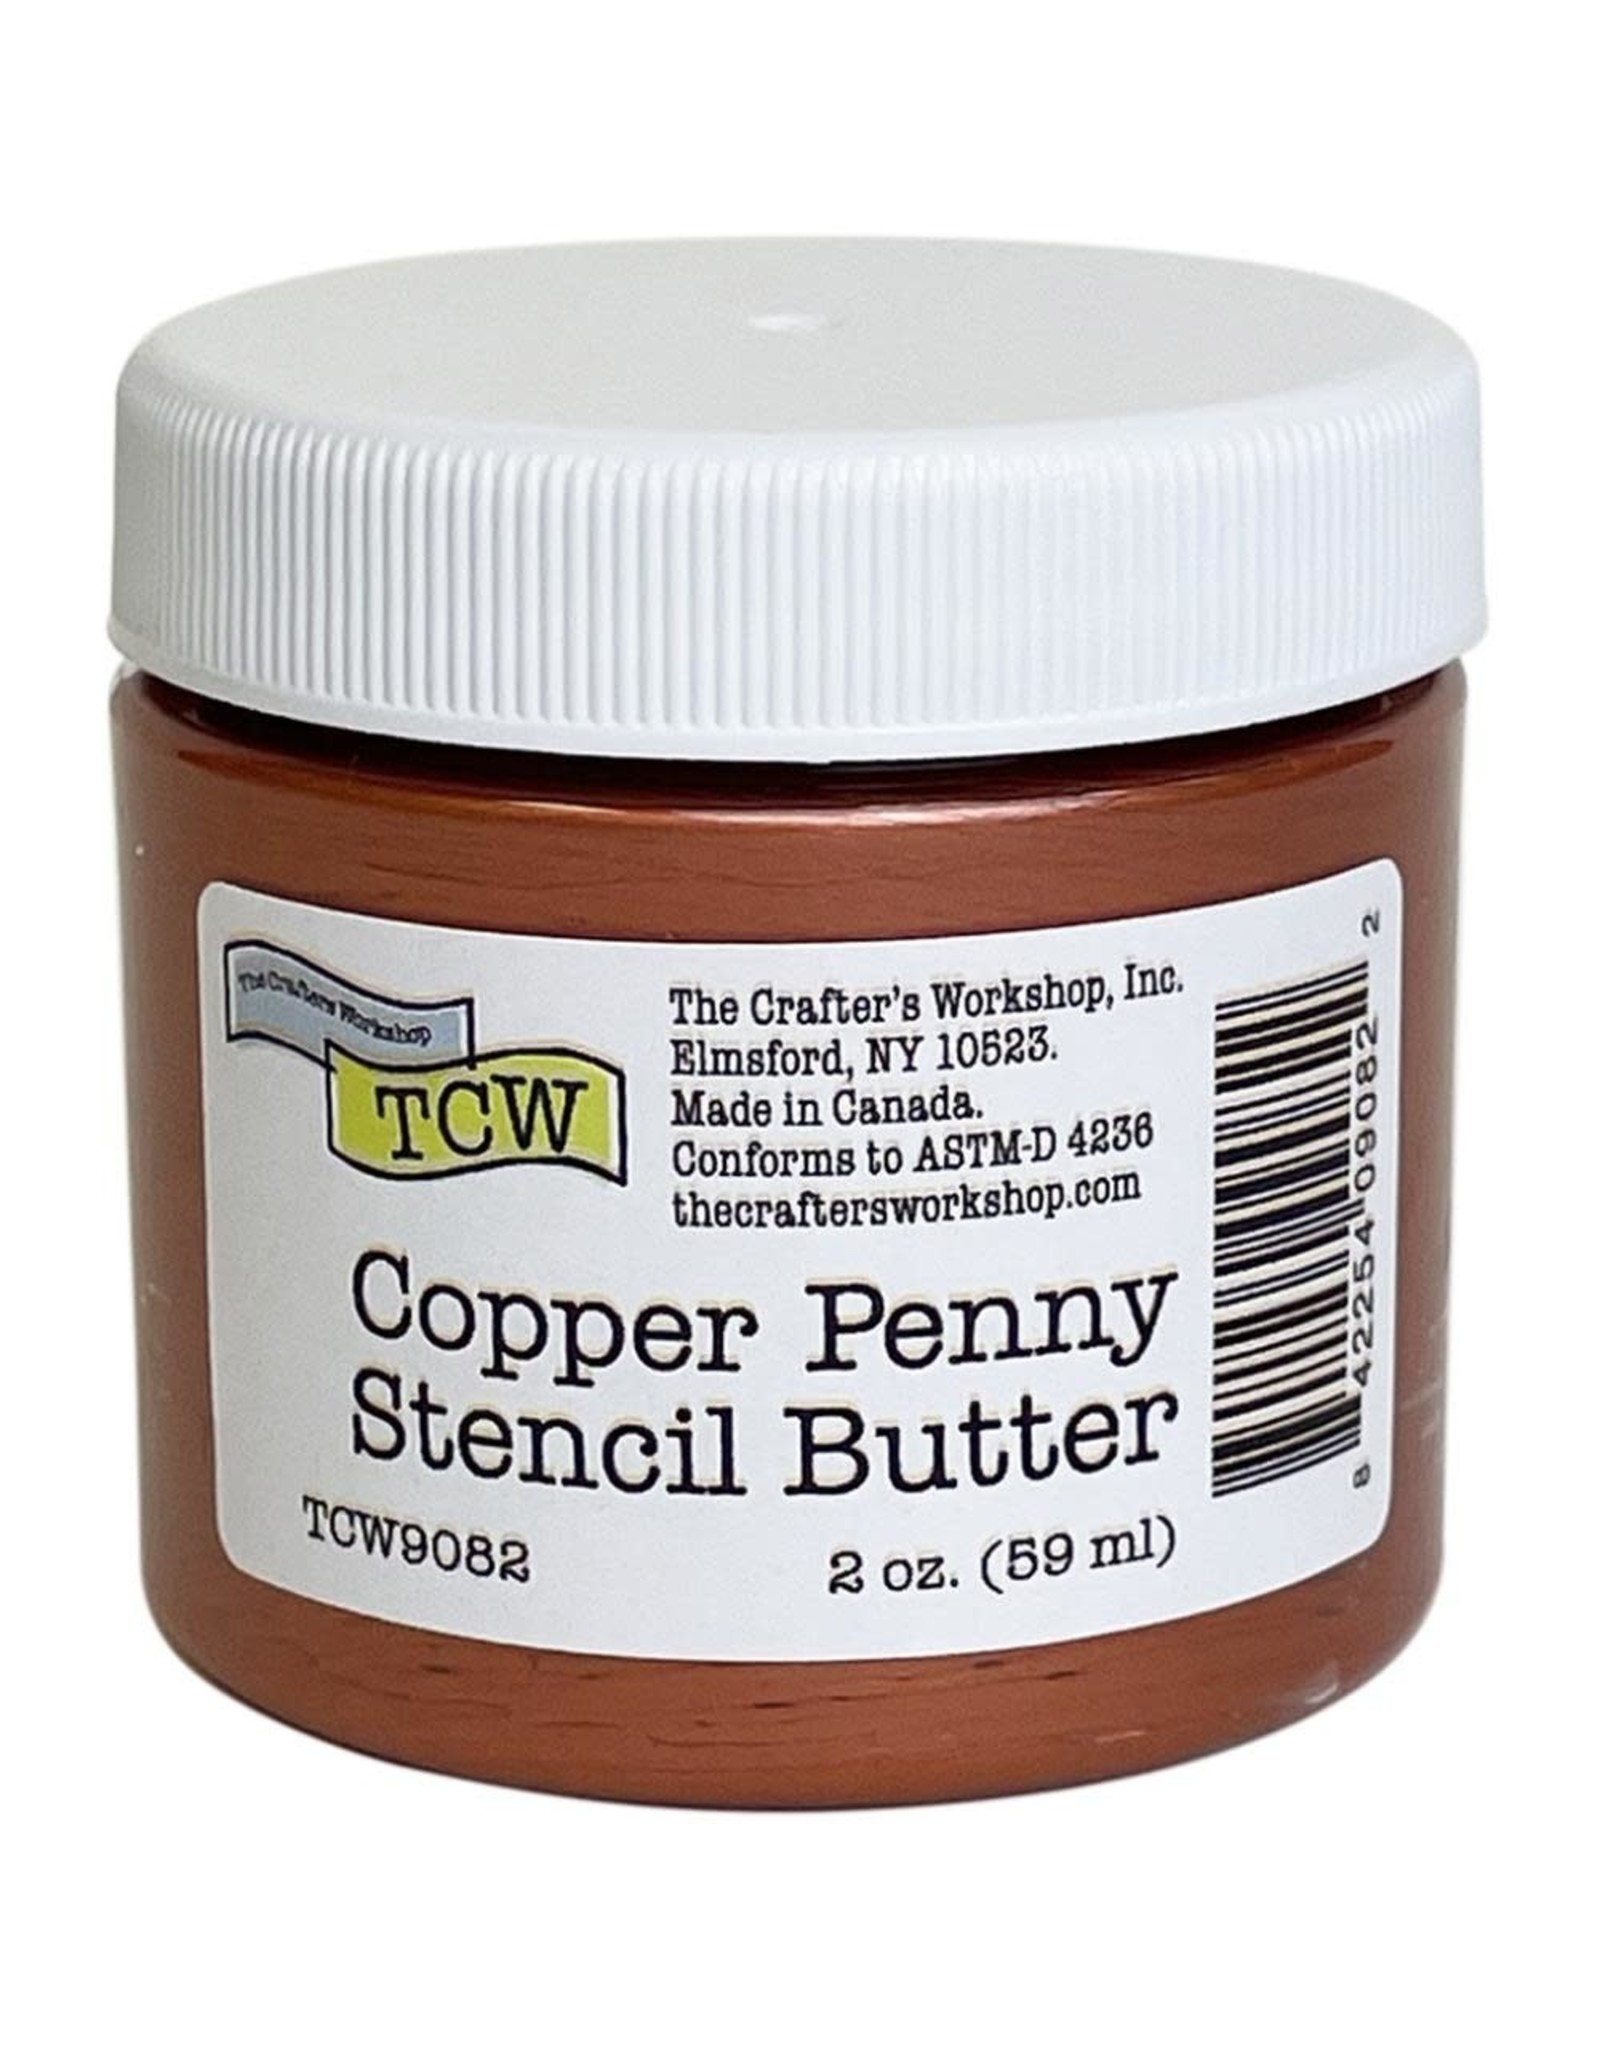 CRAFTERS WORKSHOP THE CRAFTERS WORKSHOP COPPER PENNY STENCIL BUTTER 2oz